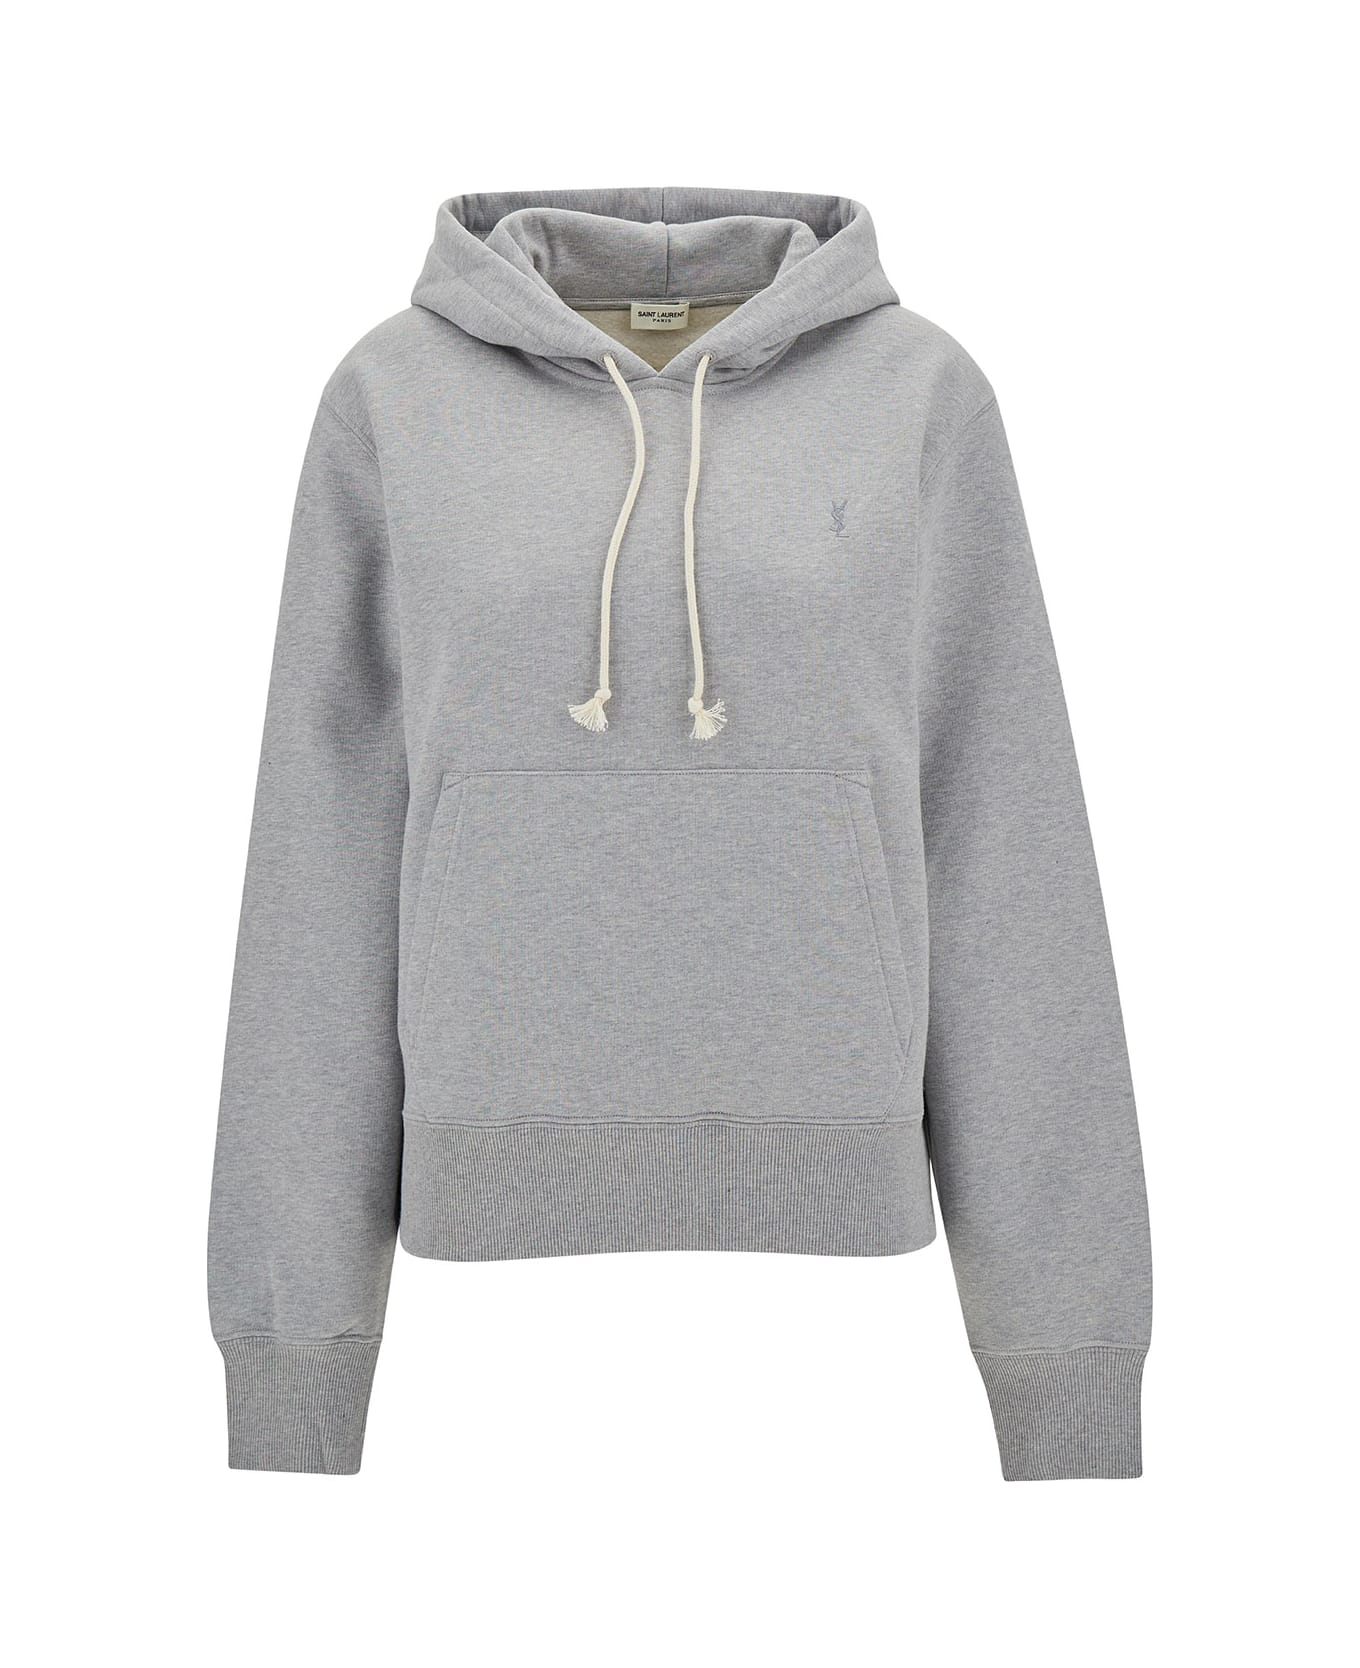 Saint Laurent Grey Hoodie With Cassandre Embroidery In Cotton Woman - Grey